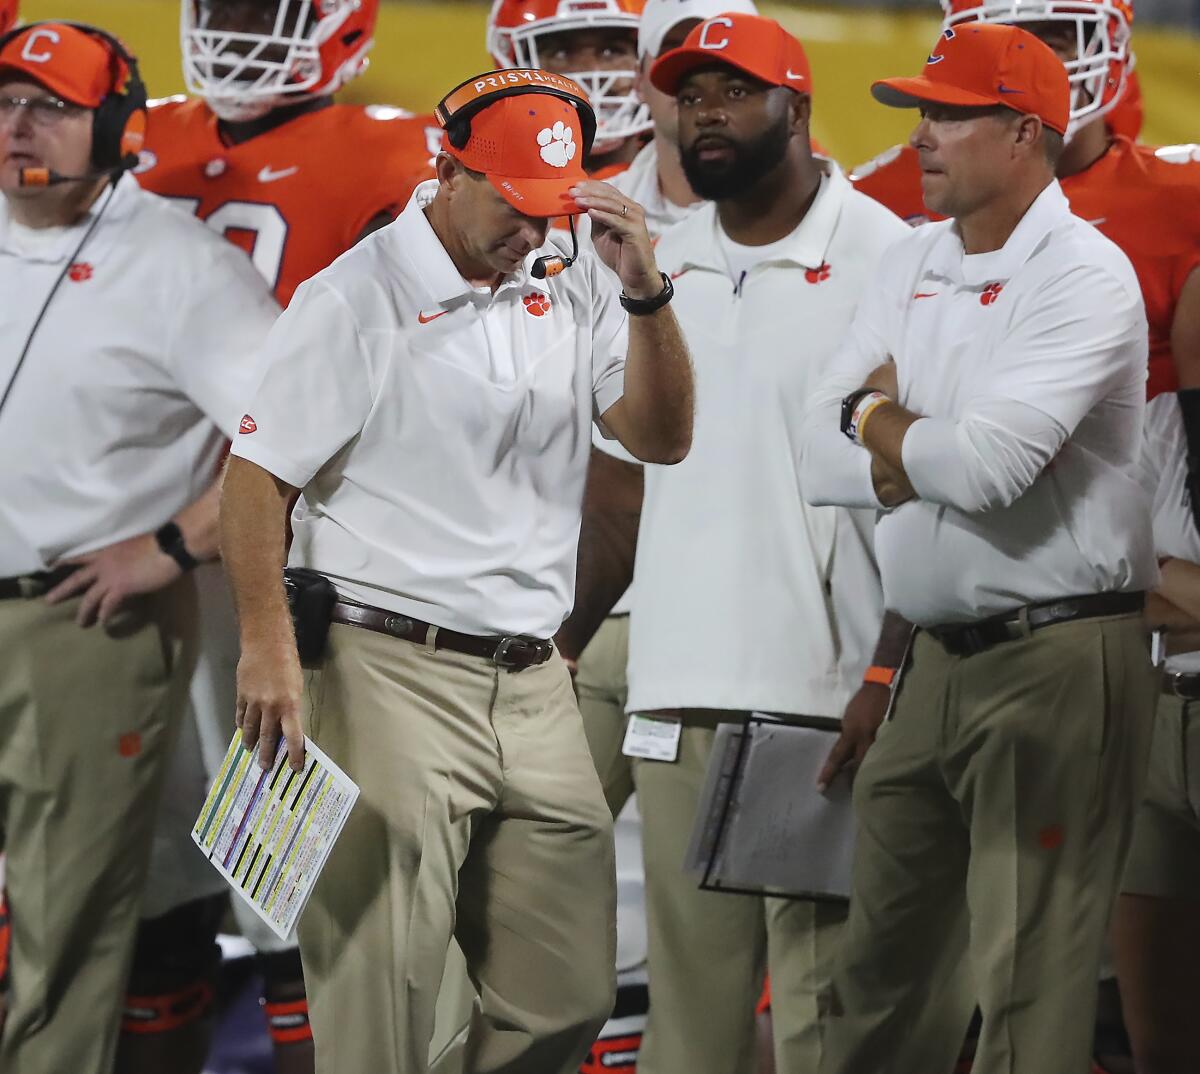 Clemson coach Dabo Swinney reacts after a sack while walking the sideline during the second half of the team's NCAA college football game against Georgia on Saturday, Sept. 4, 2021, in Charlotte, N.C. (Curtis Compton/Atlanta Journal-Constitution via AP)